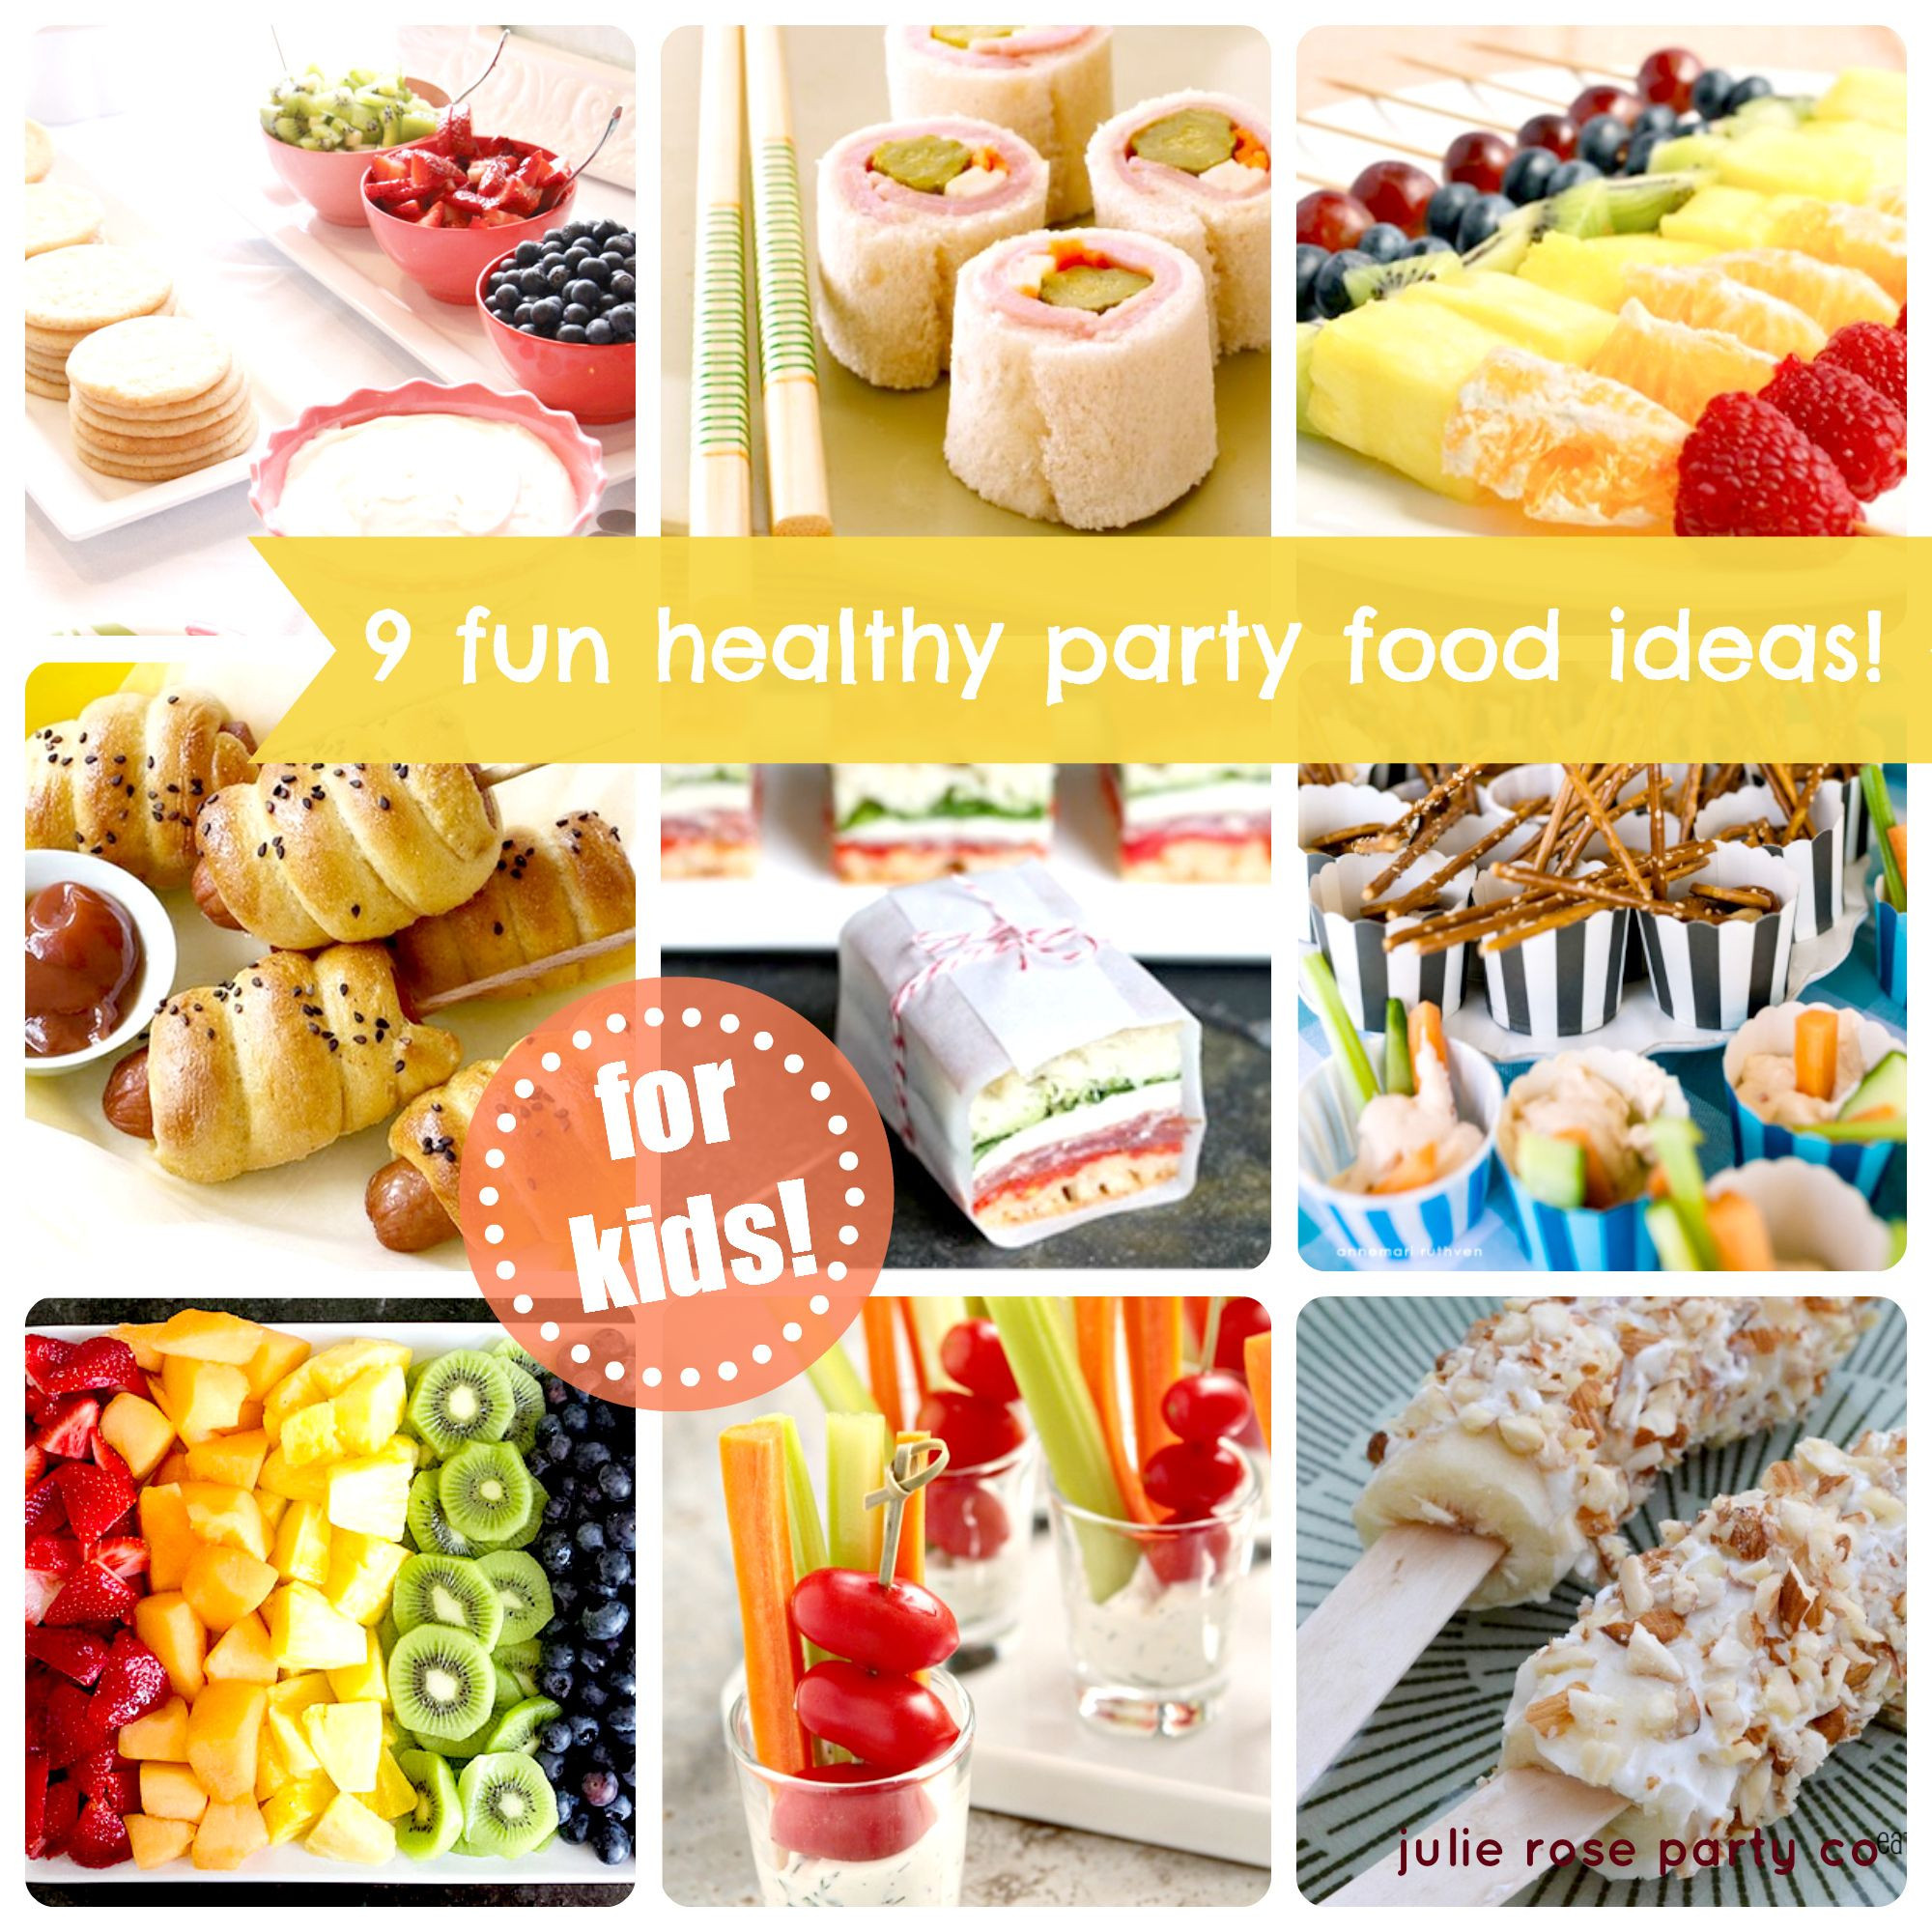 Party Food Ideas For Teenagers
 9 fun and healthy party food ideas kids